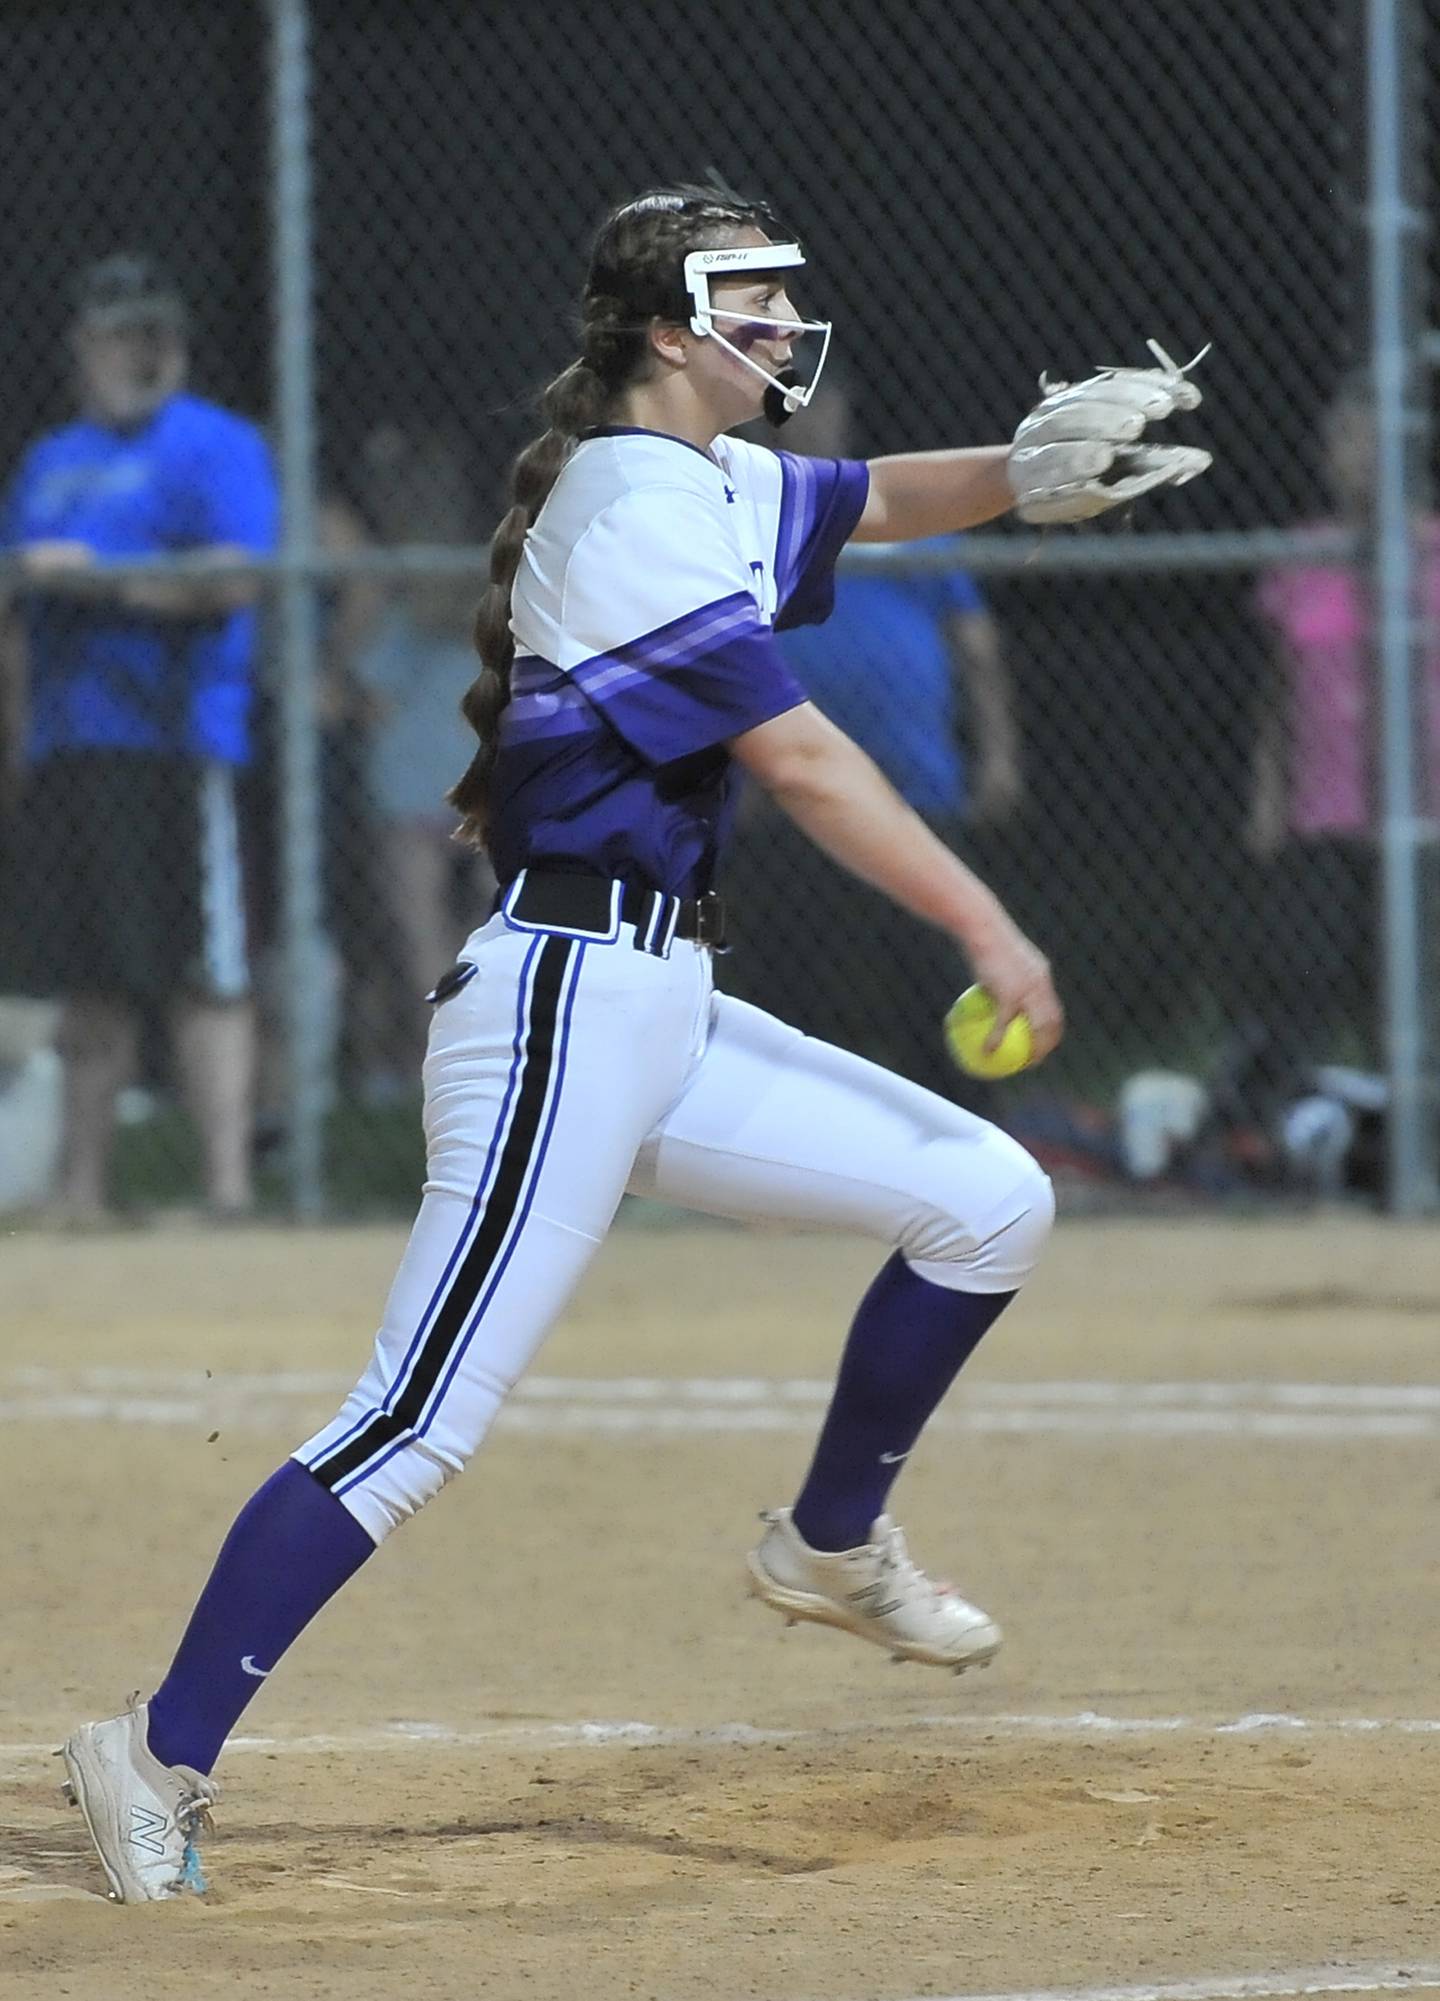 Downers Grove North relief pitcher Bridget Callaghan delivers to a Downers Grove South batter during a game on May. 12, 2022 at McCollum Park in Downers Grove.